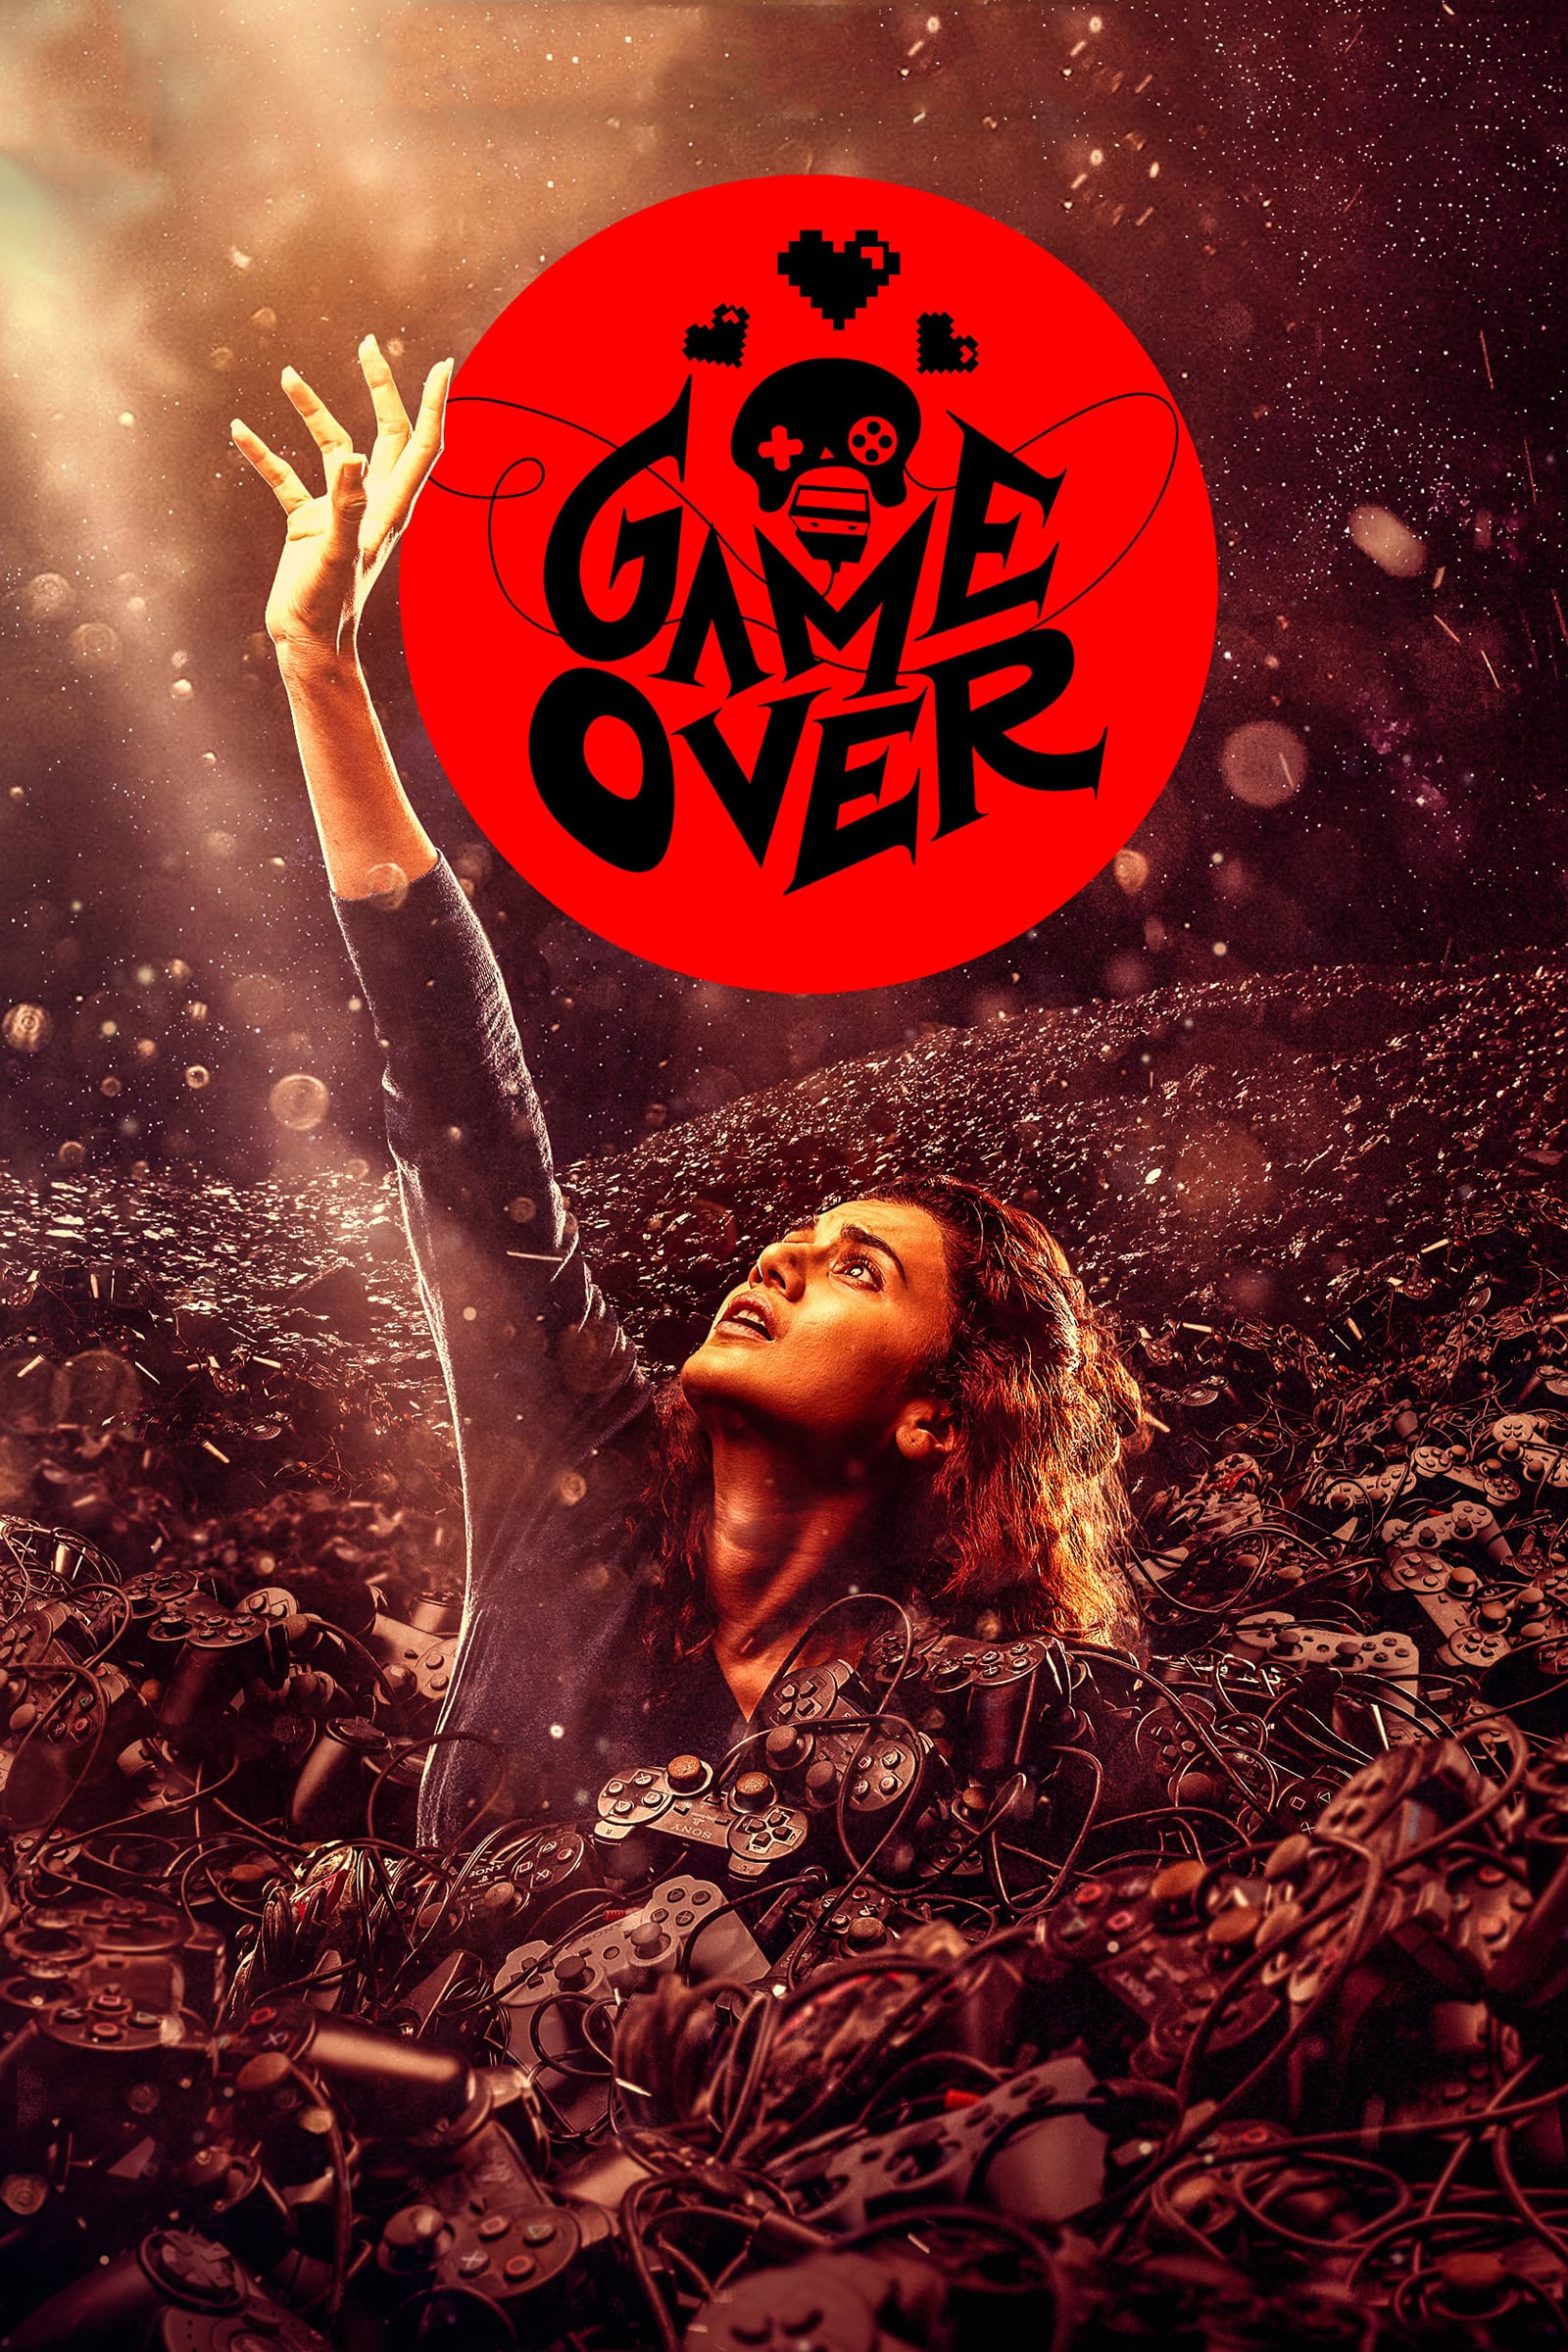 Poster for the movie "Game Over"